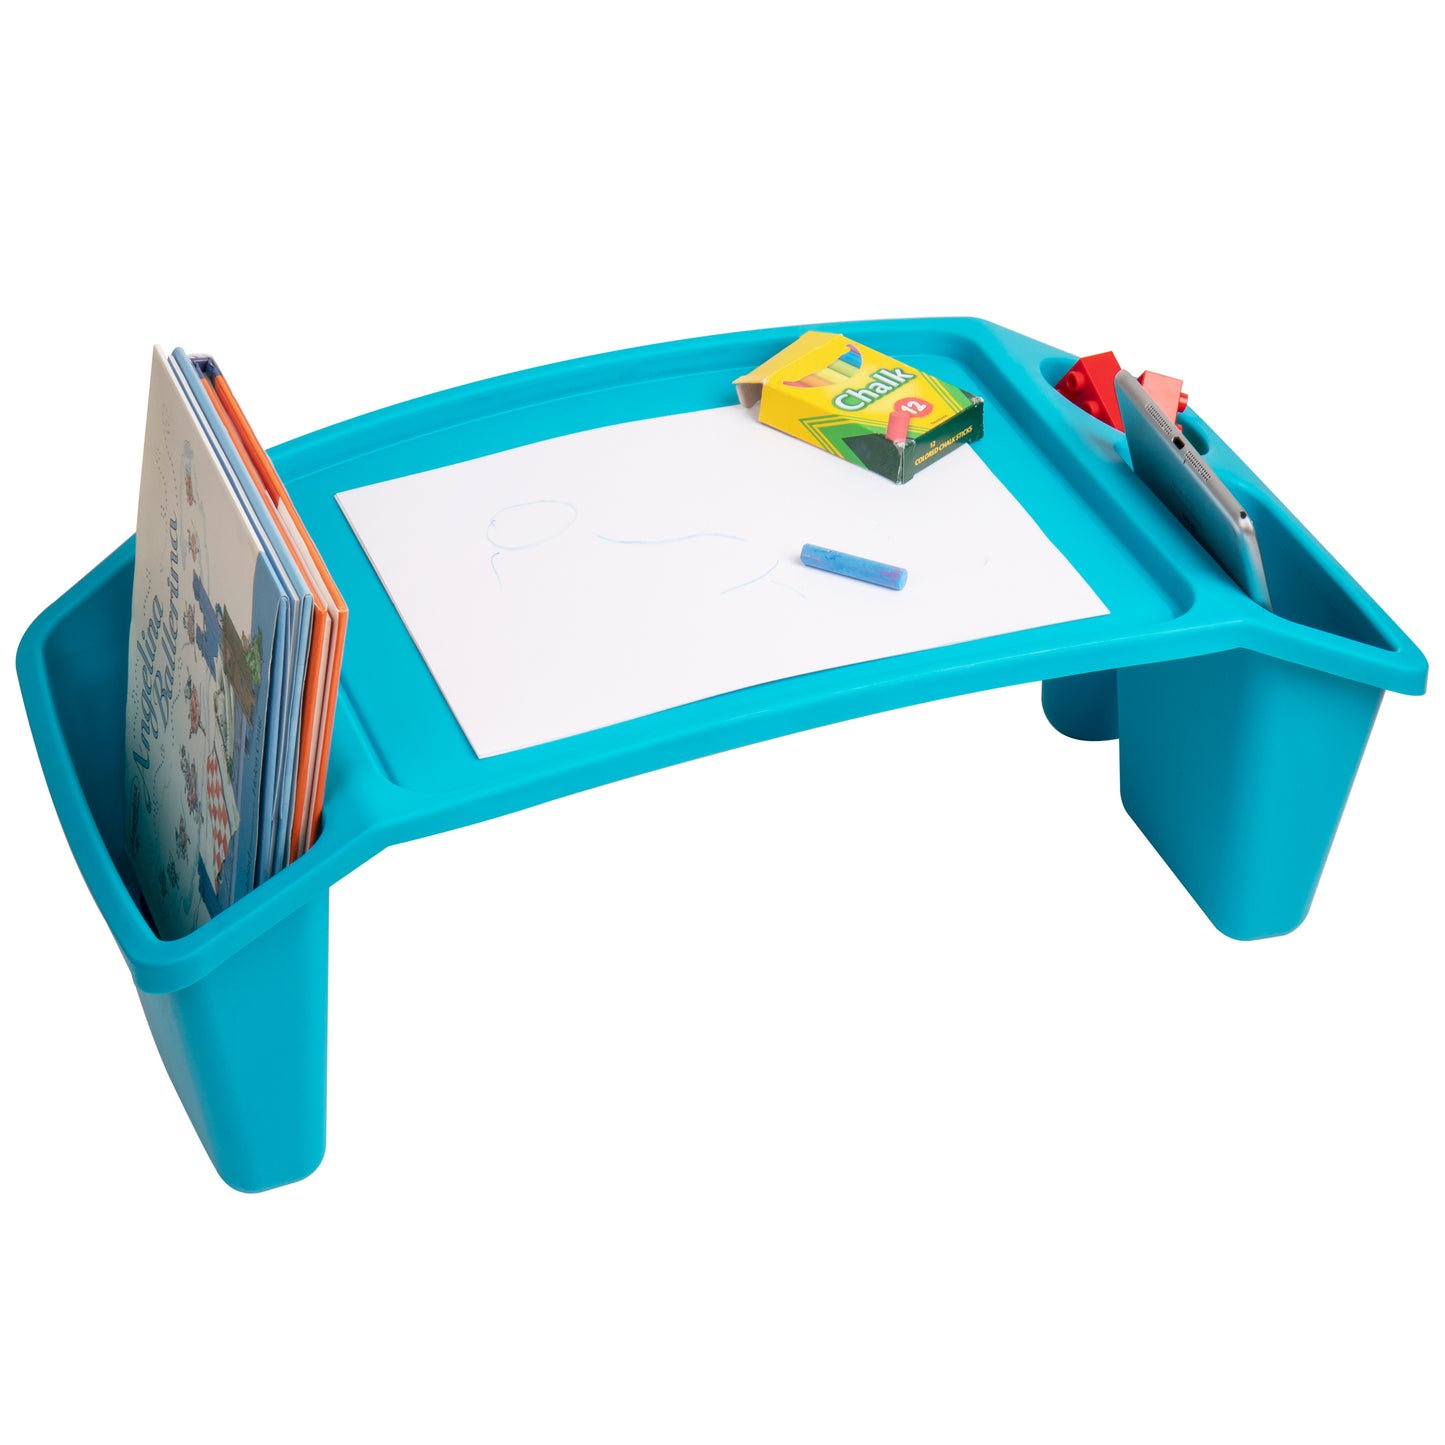 Mind Reader Kids Lap Desk, Activity Tray, Drawing, Stackable, Classroom, Portable, Plastic, 22.25"L x 10.75"W x 8.5"H